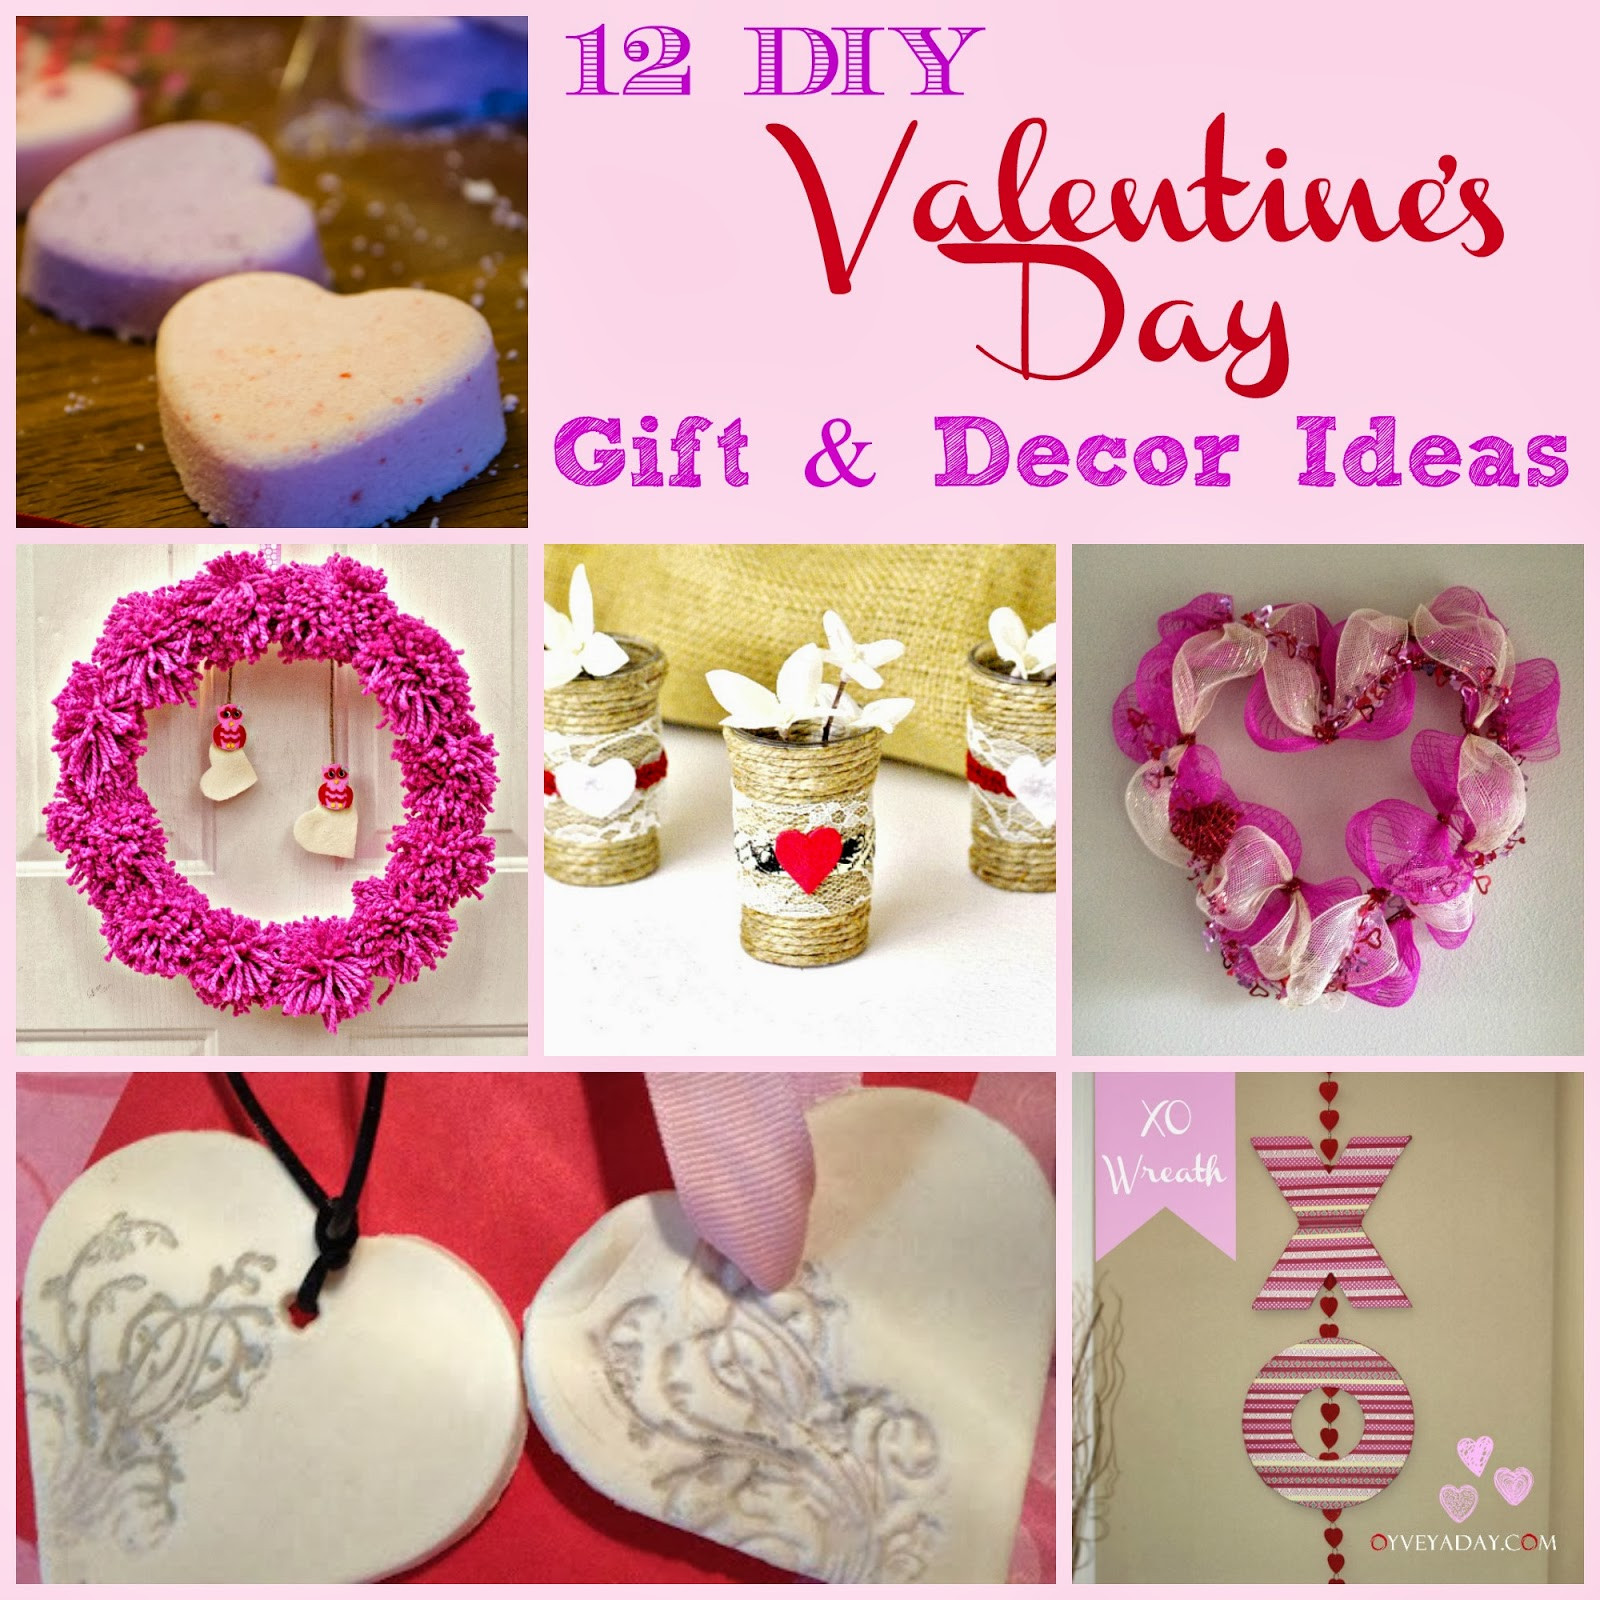 Valentine Day Handmade Gift Ideas
 12 DIY Valentine s Day Gift & Decor Ideas Outnumbered 3 to 1